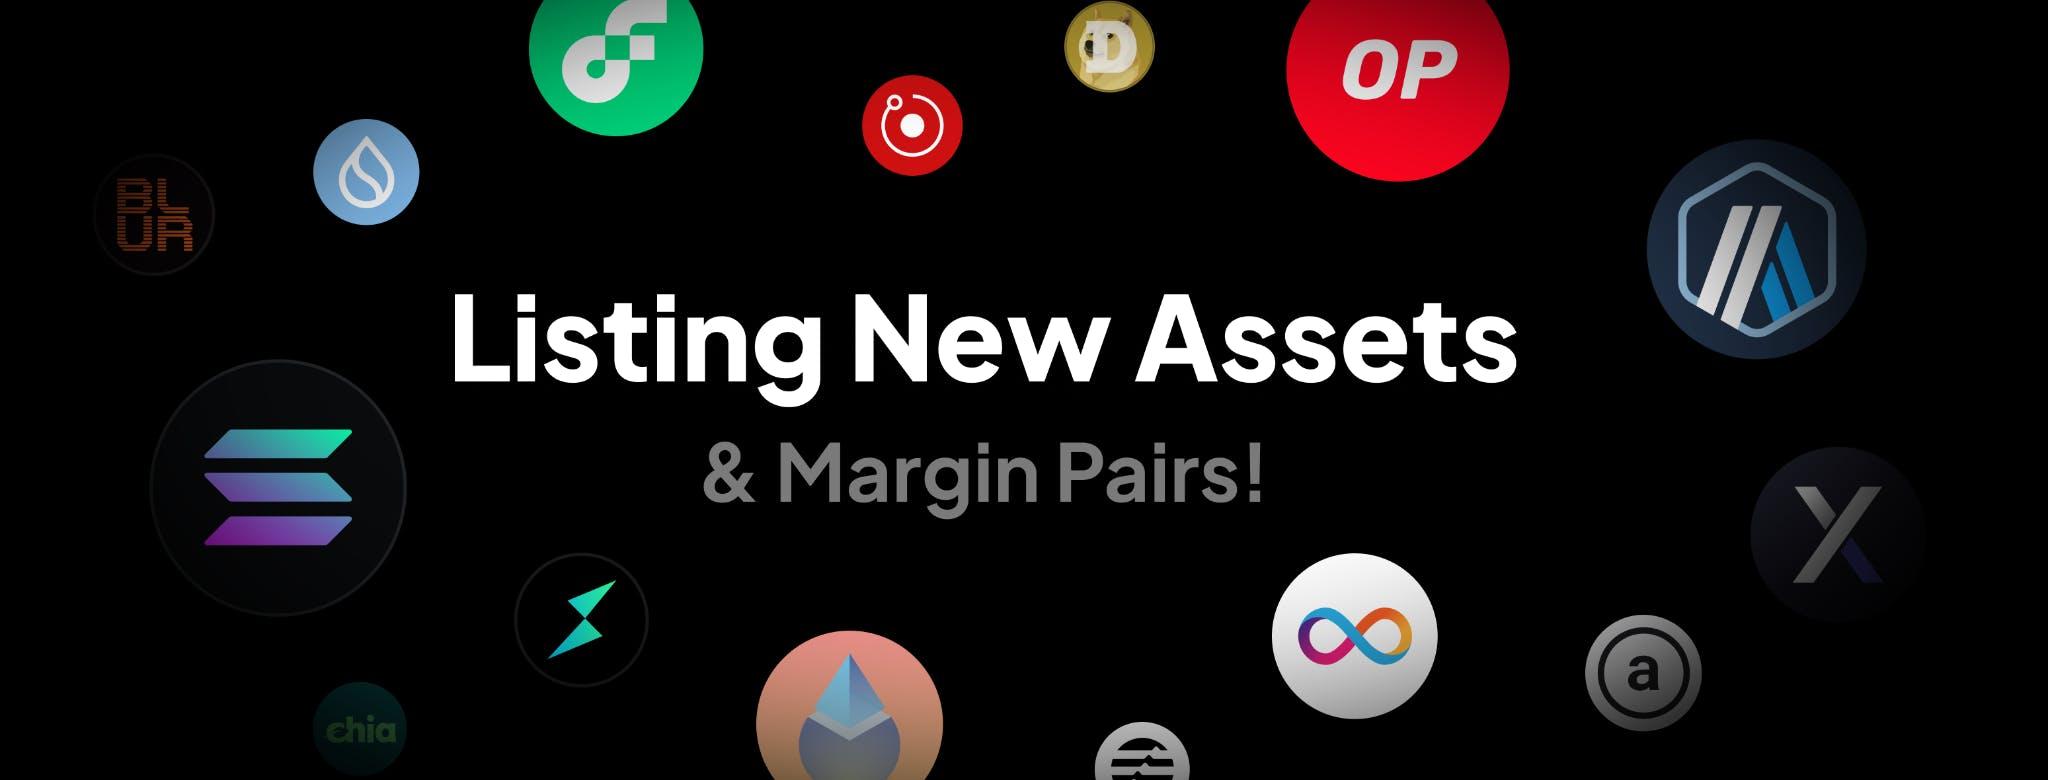 Listing New Assers & Margin Pairs at Coinmetro